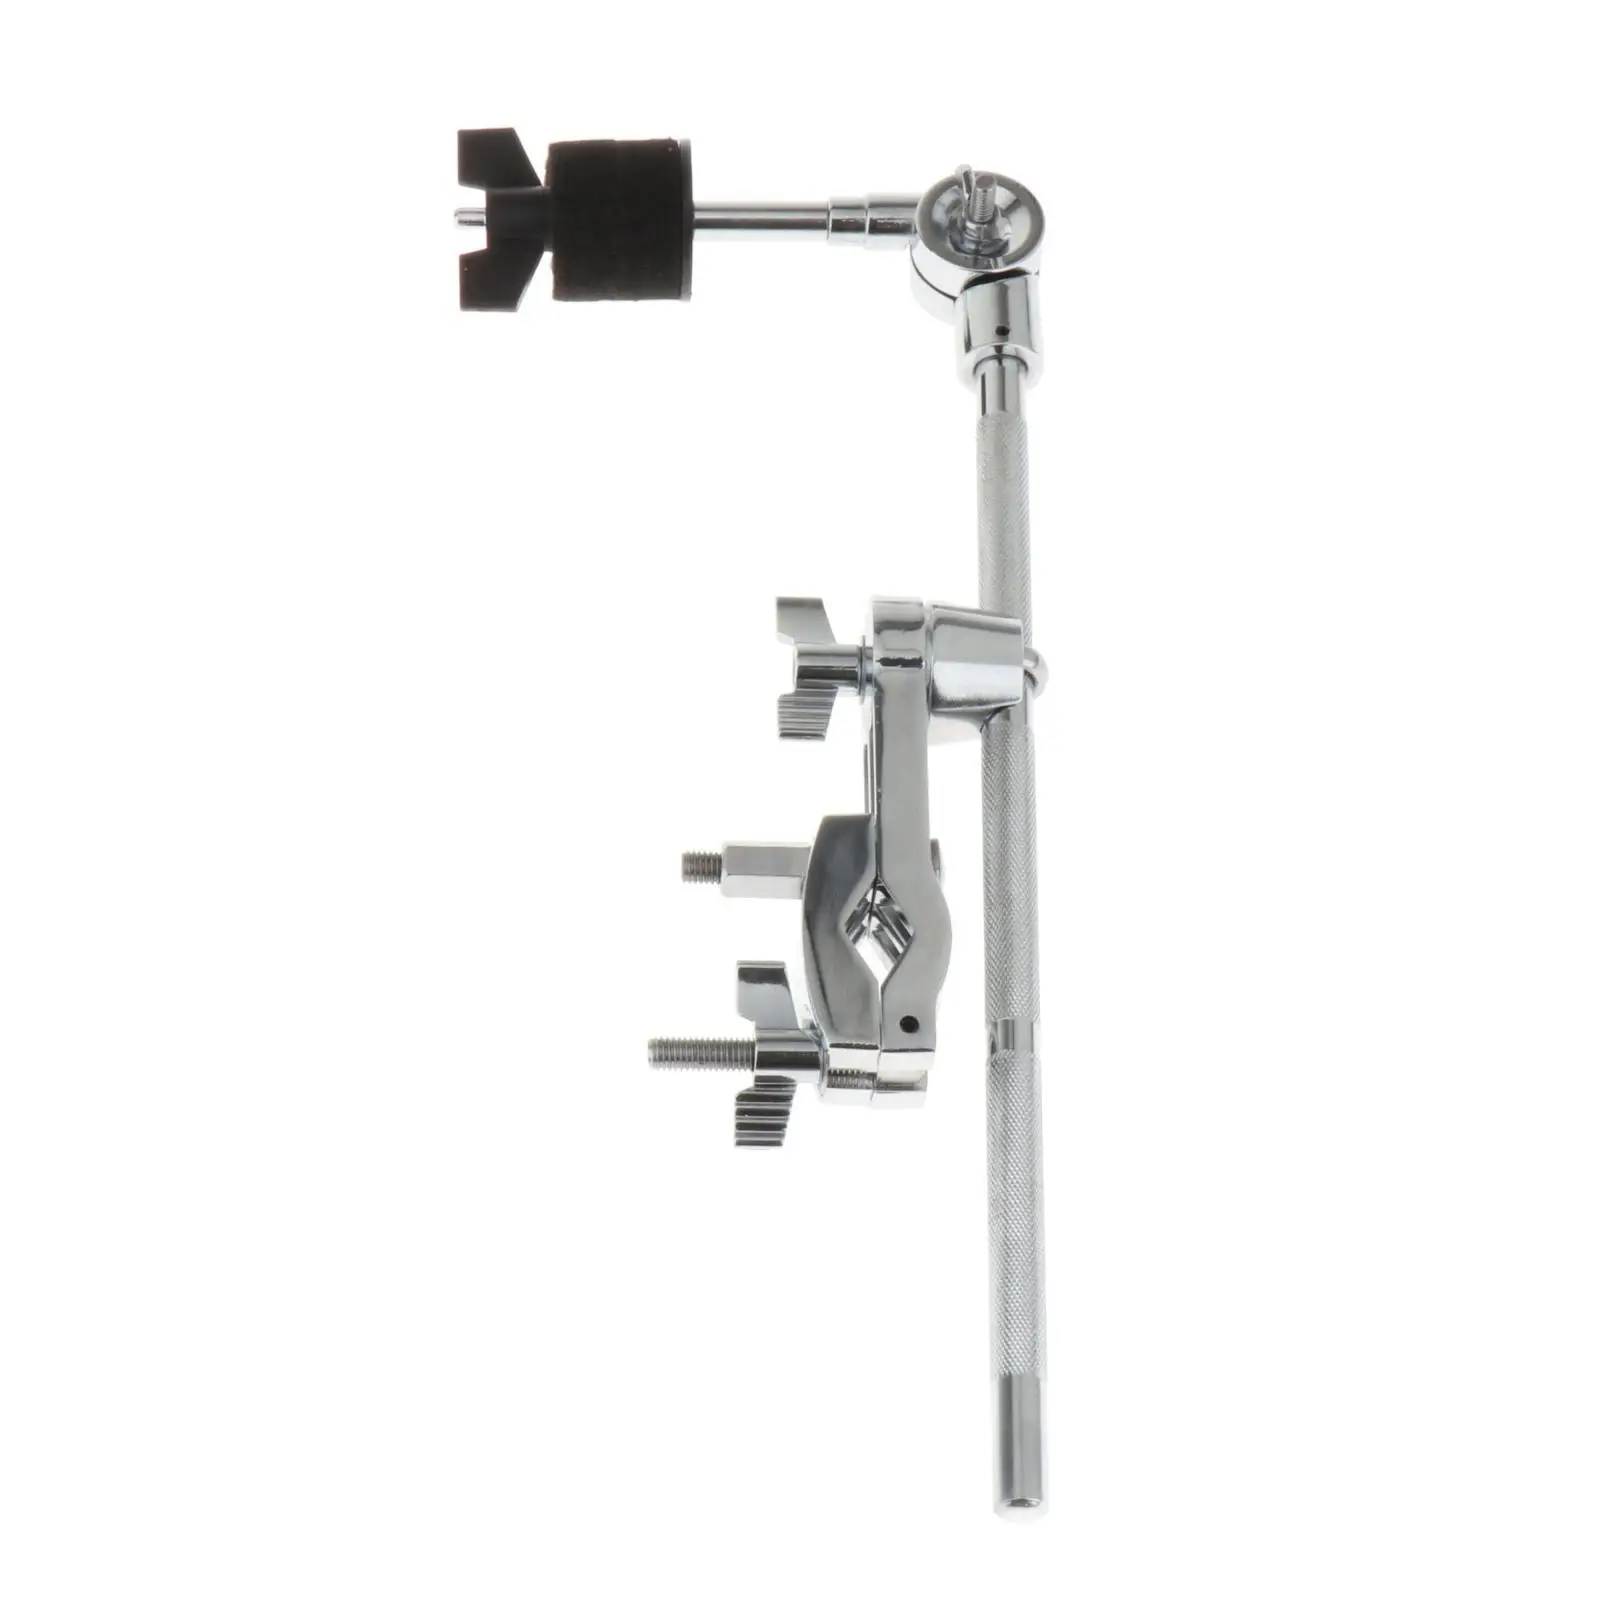 Drum Stand Clamp Drum Cymbal Stand Lightweight Metal Cymbal Booming Rachets Tilt Musical Instrument Parts Drum Cymbal Arm